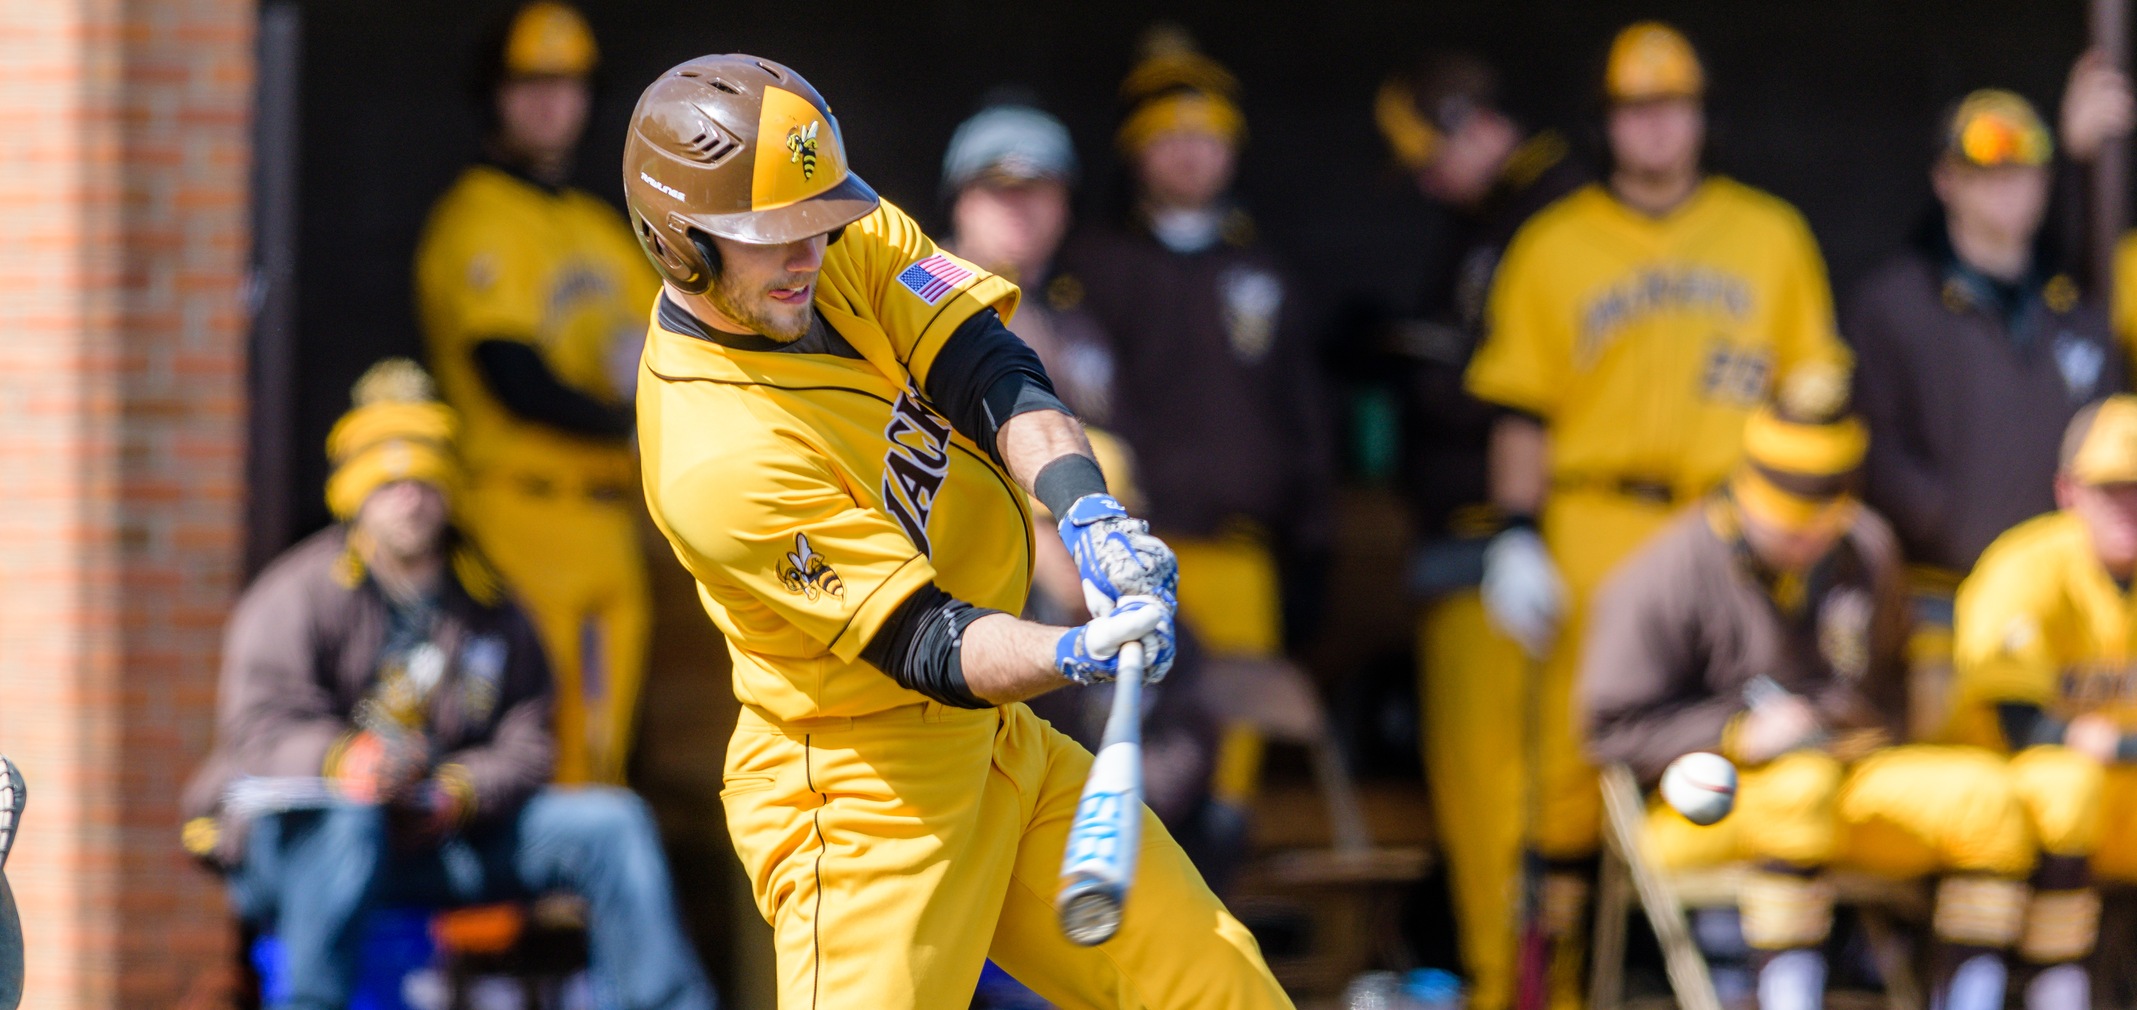 Senior All-OAC outfielder Alex Marcum hit his OAC-leading fifth home run of the season against Allegheny (Photo courtesy of Jesse Kucewicz)